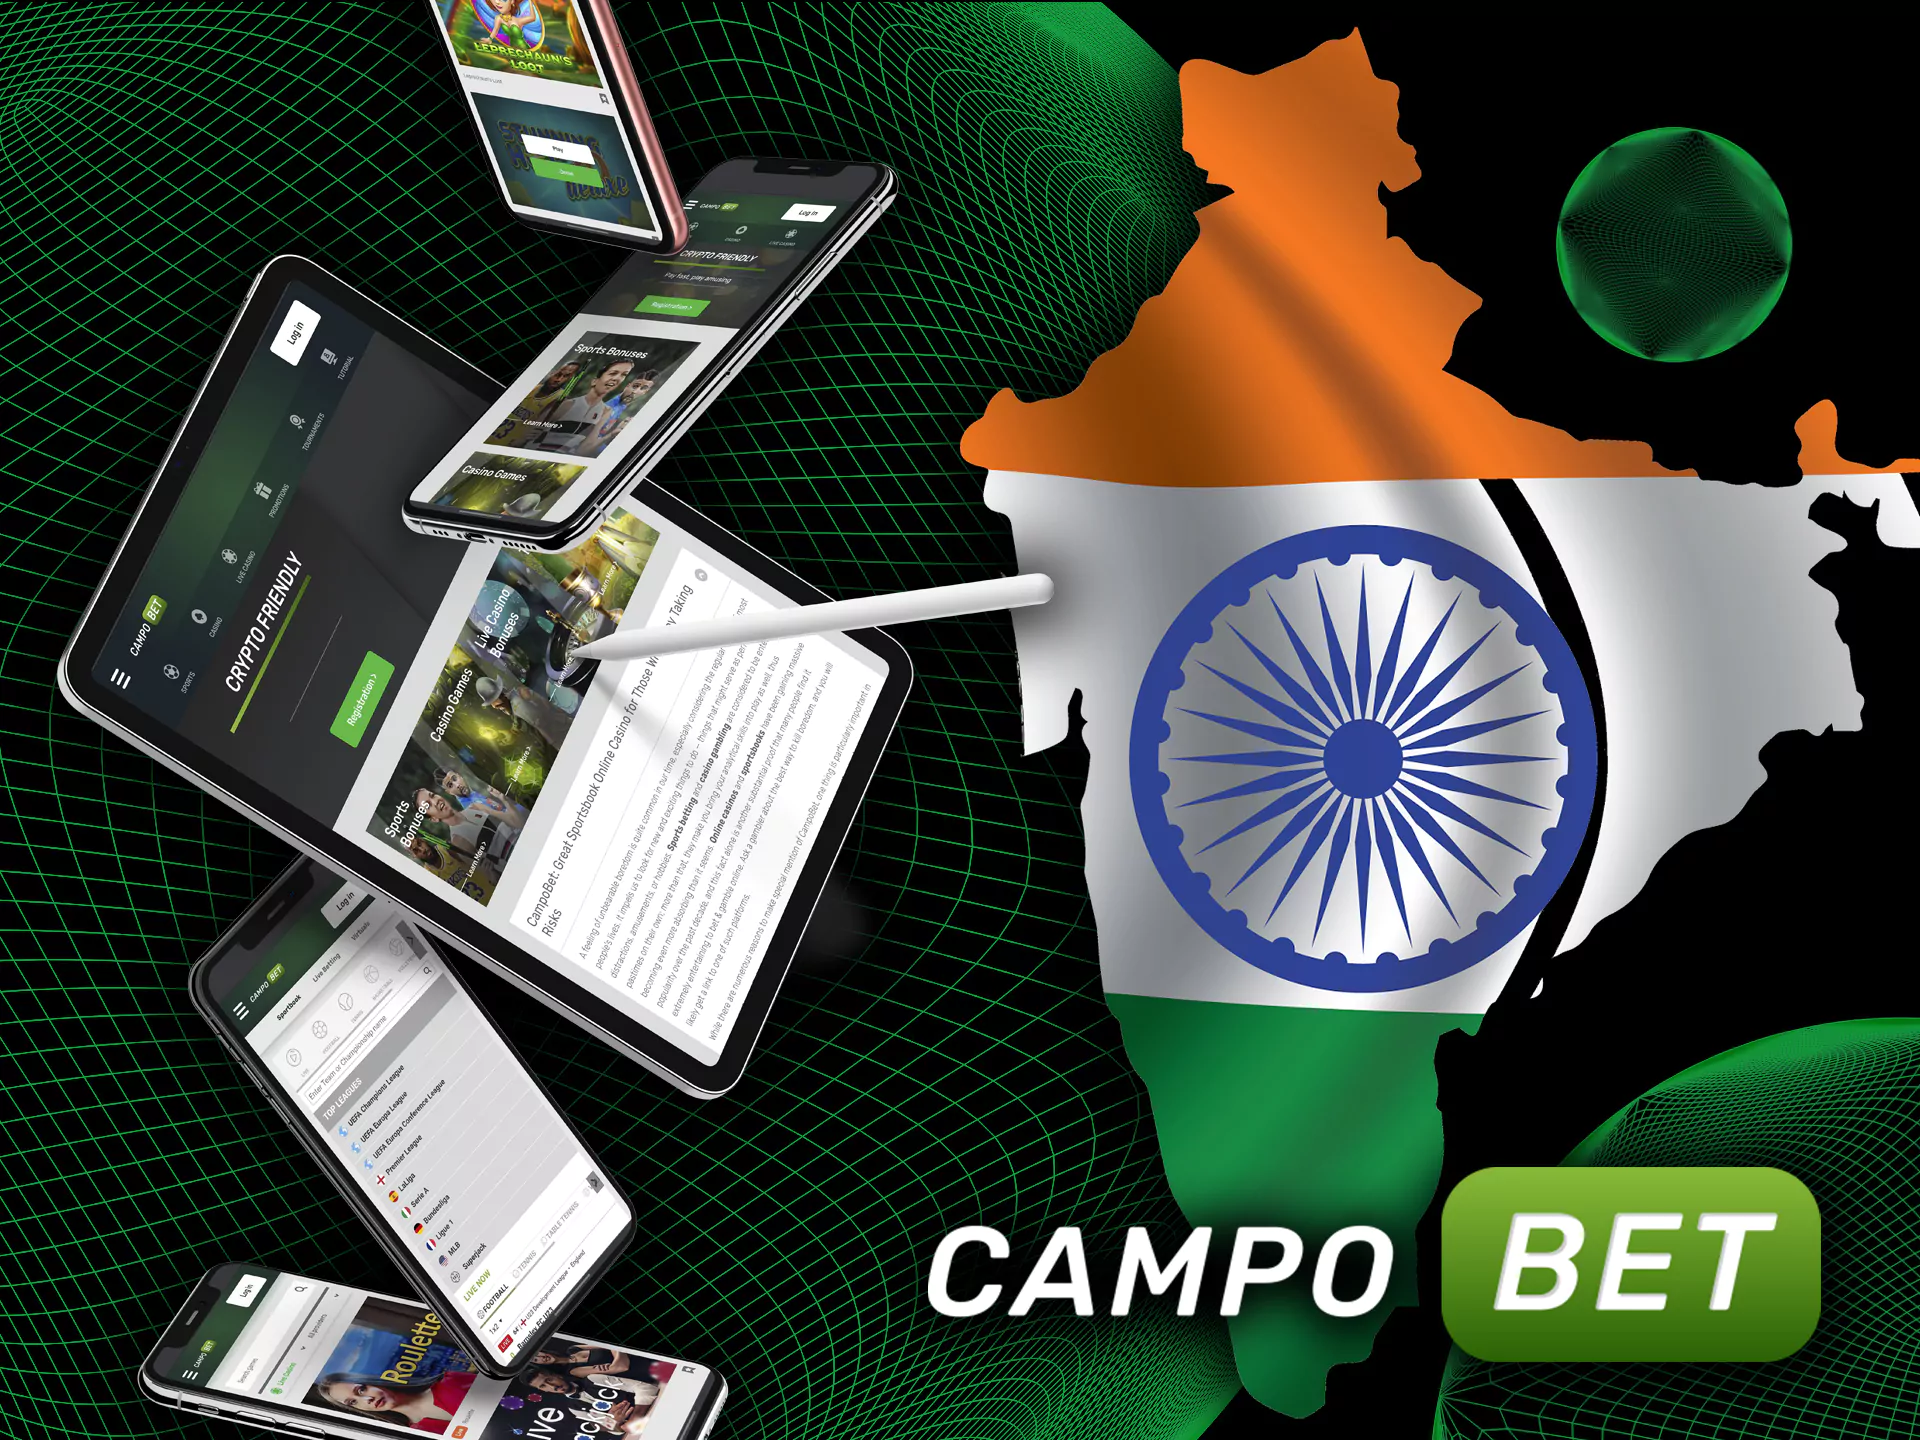 Campobet is a new but trustworthy bookmaker office working in India.